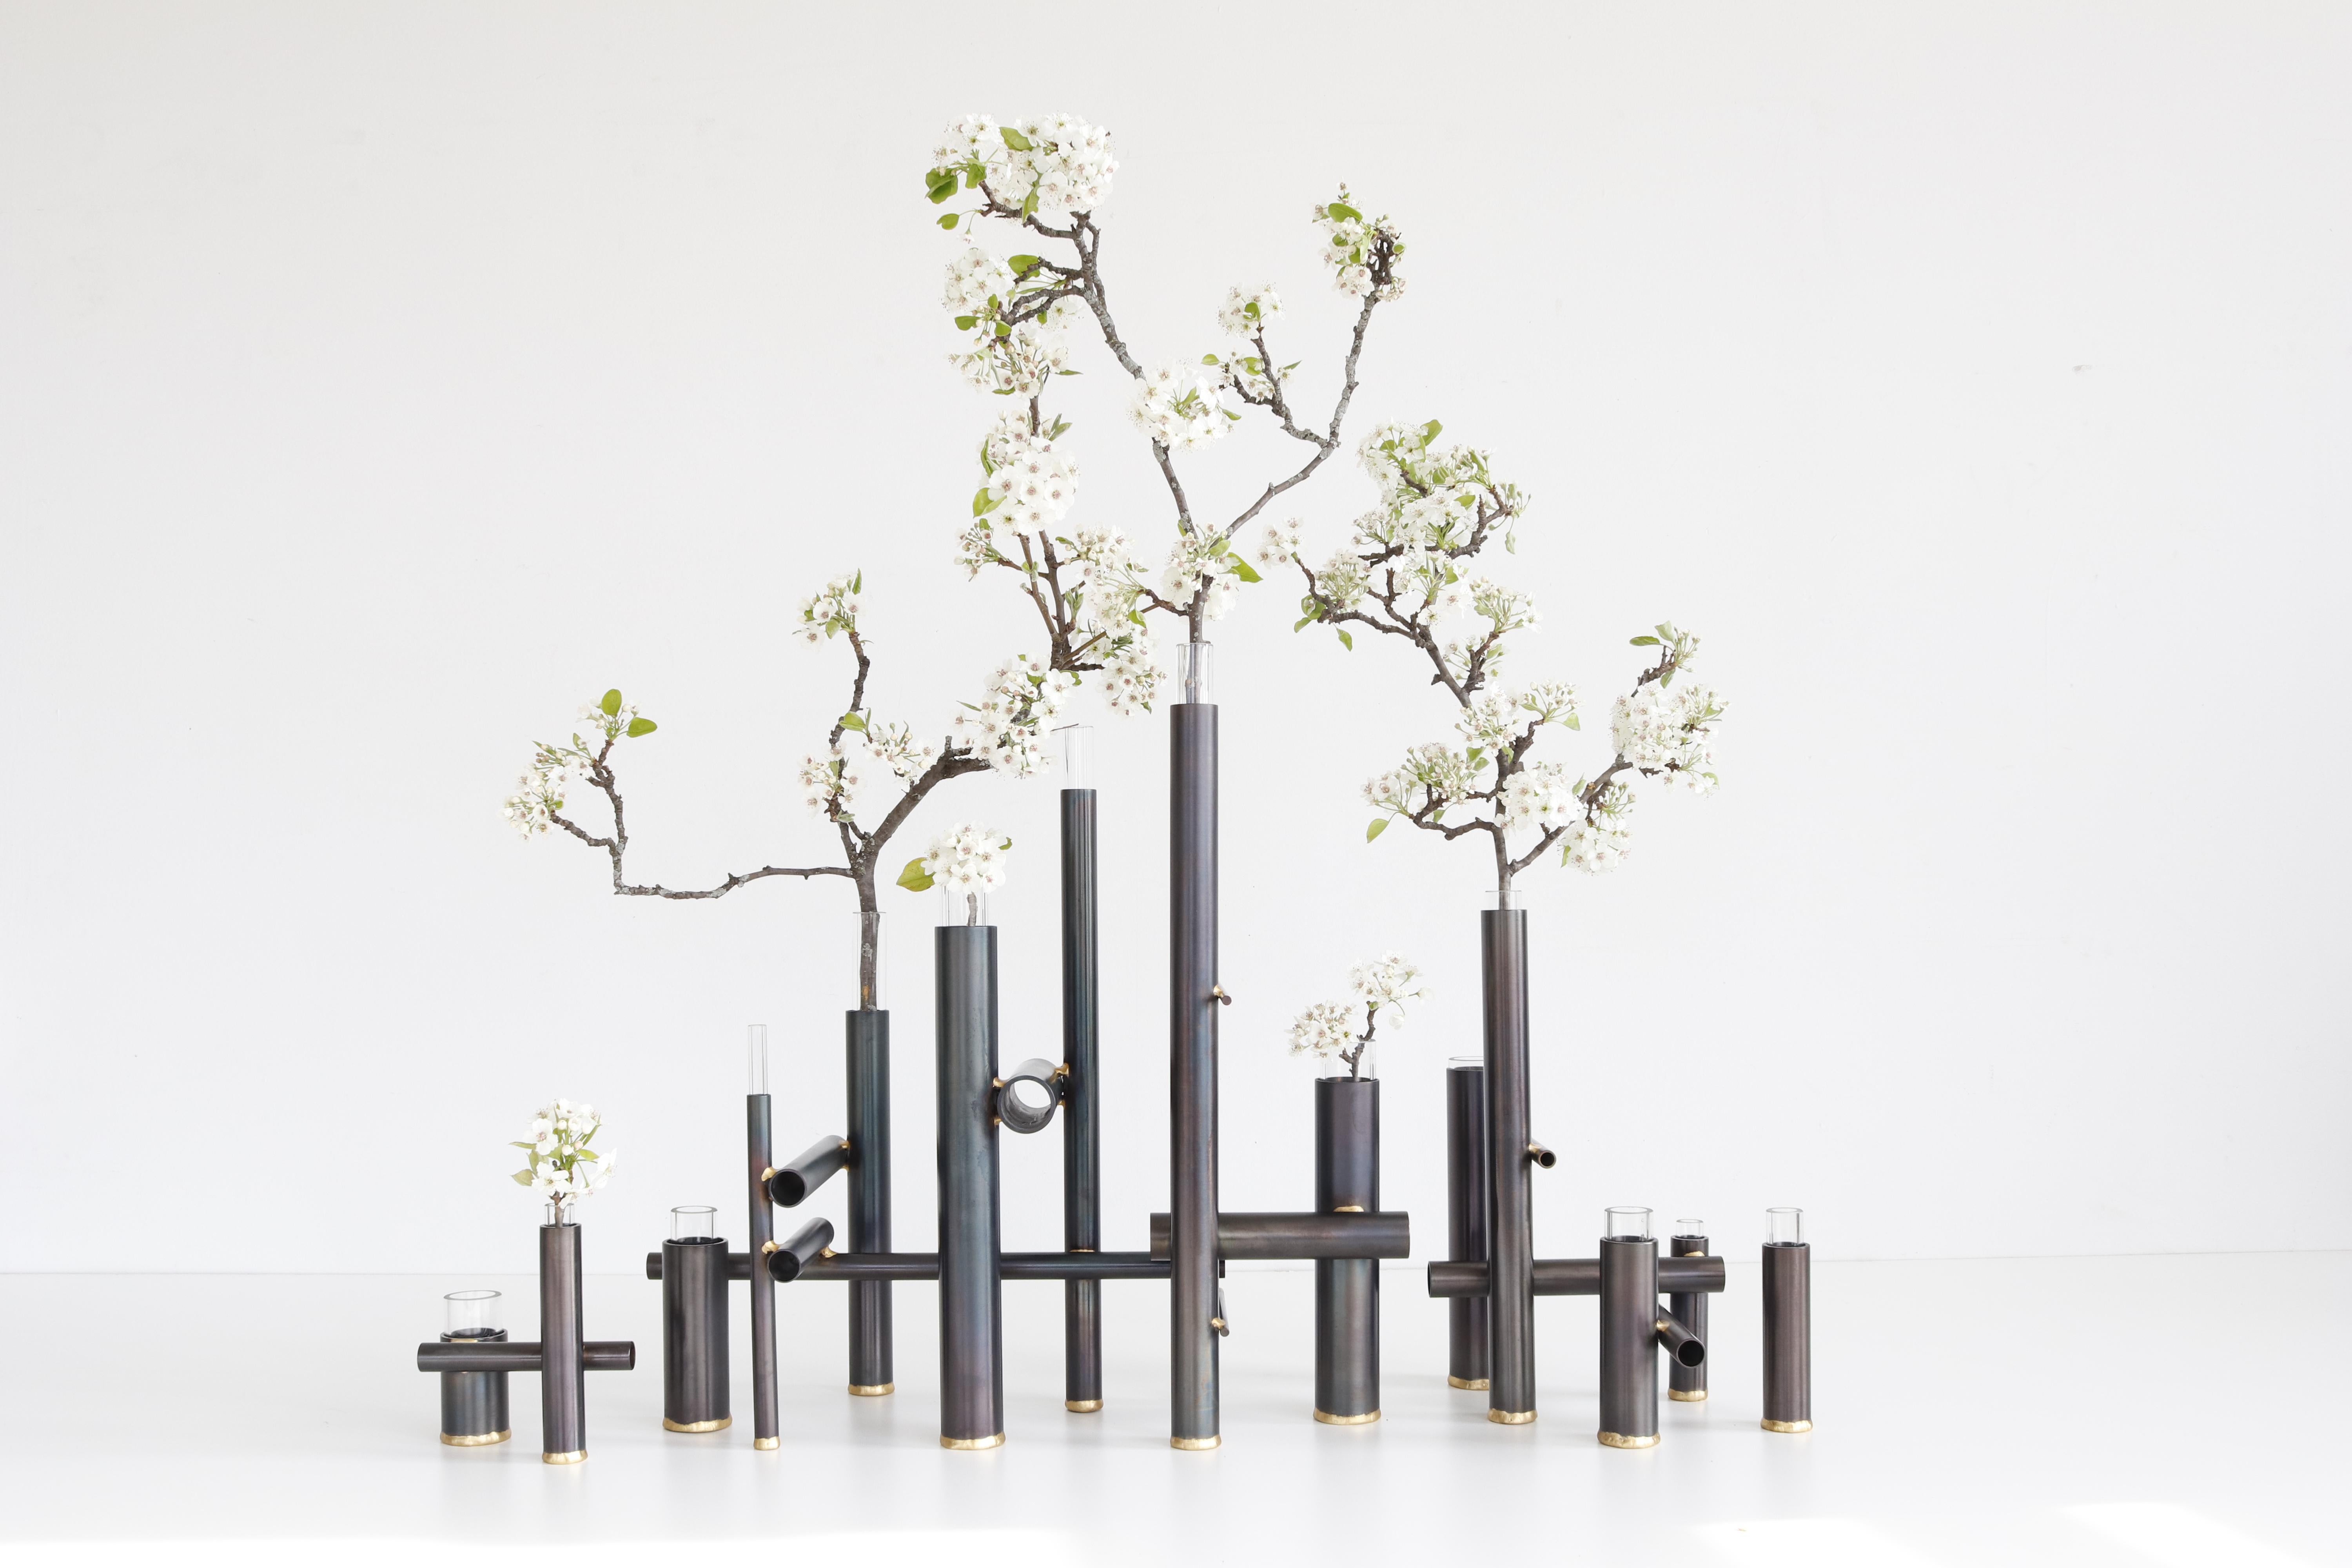 Lawless Vase by Evan Fay
Dimensions: 92 W 23 D x 54 H cm
Materials: Steel, Brass, Glass

Lawless Vase is composed of 5 separate vases each having a different number of “glass sleeves” for
a total of 15 vertical openings.
Each of the 5